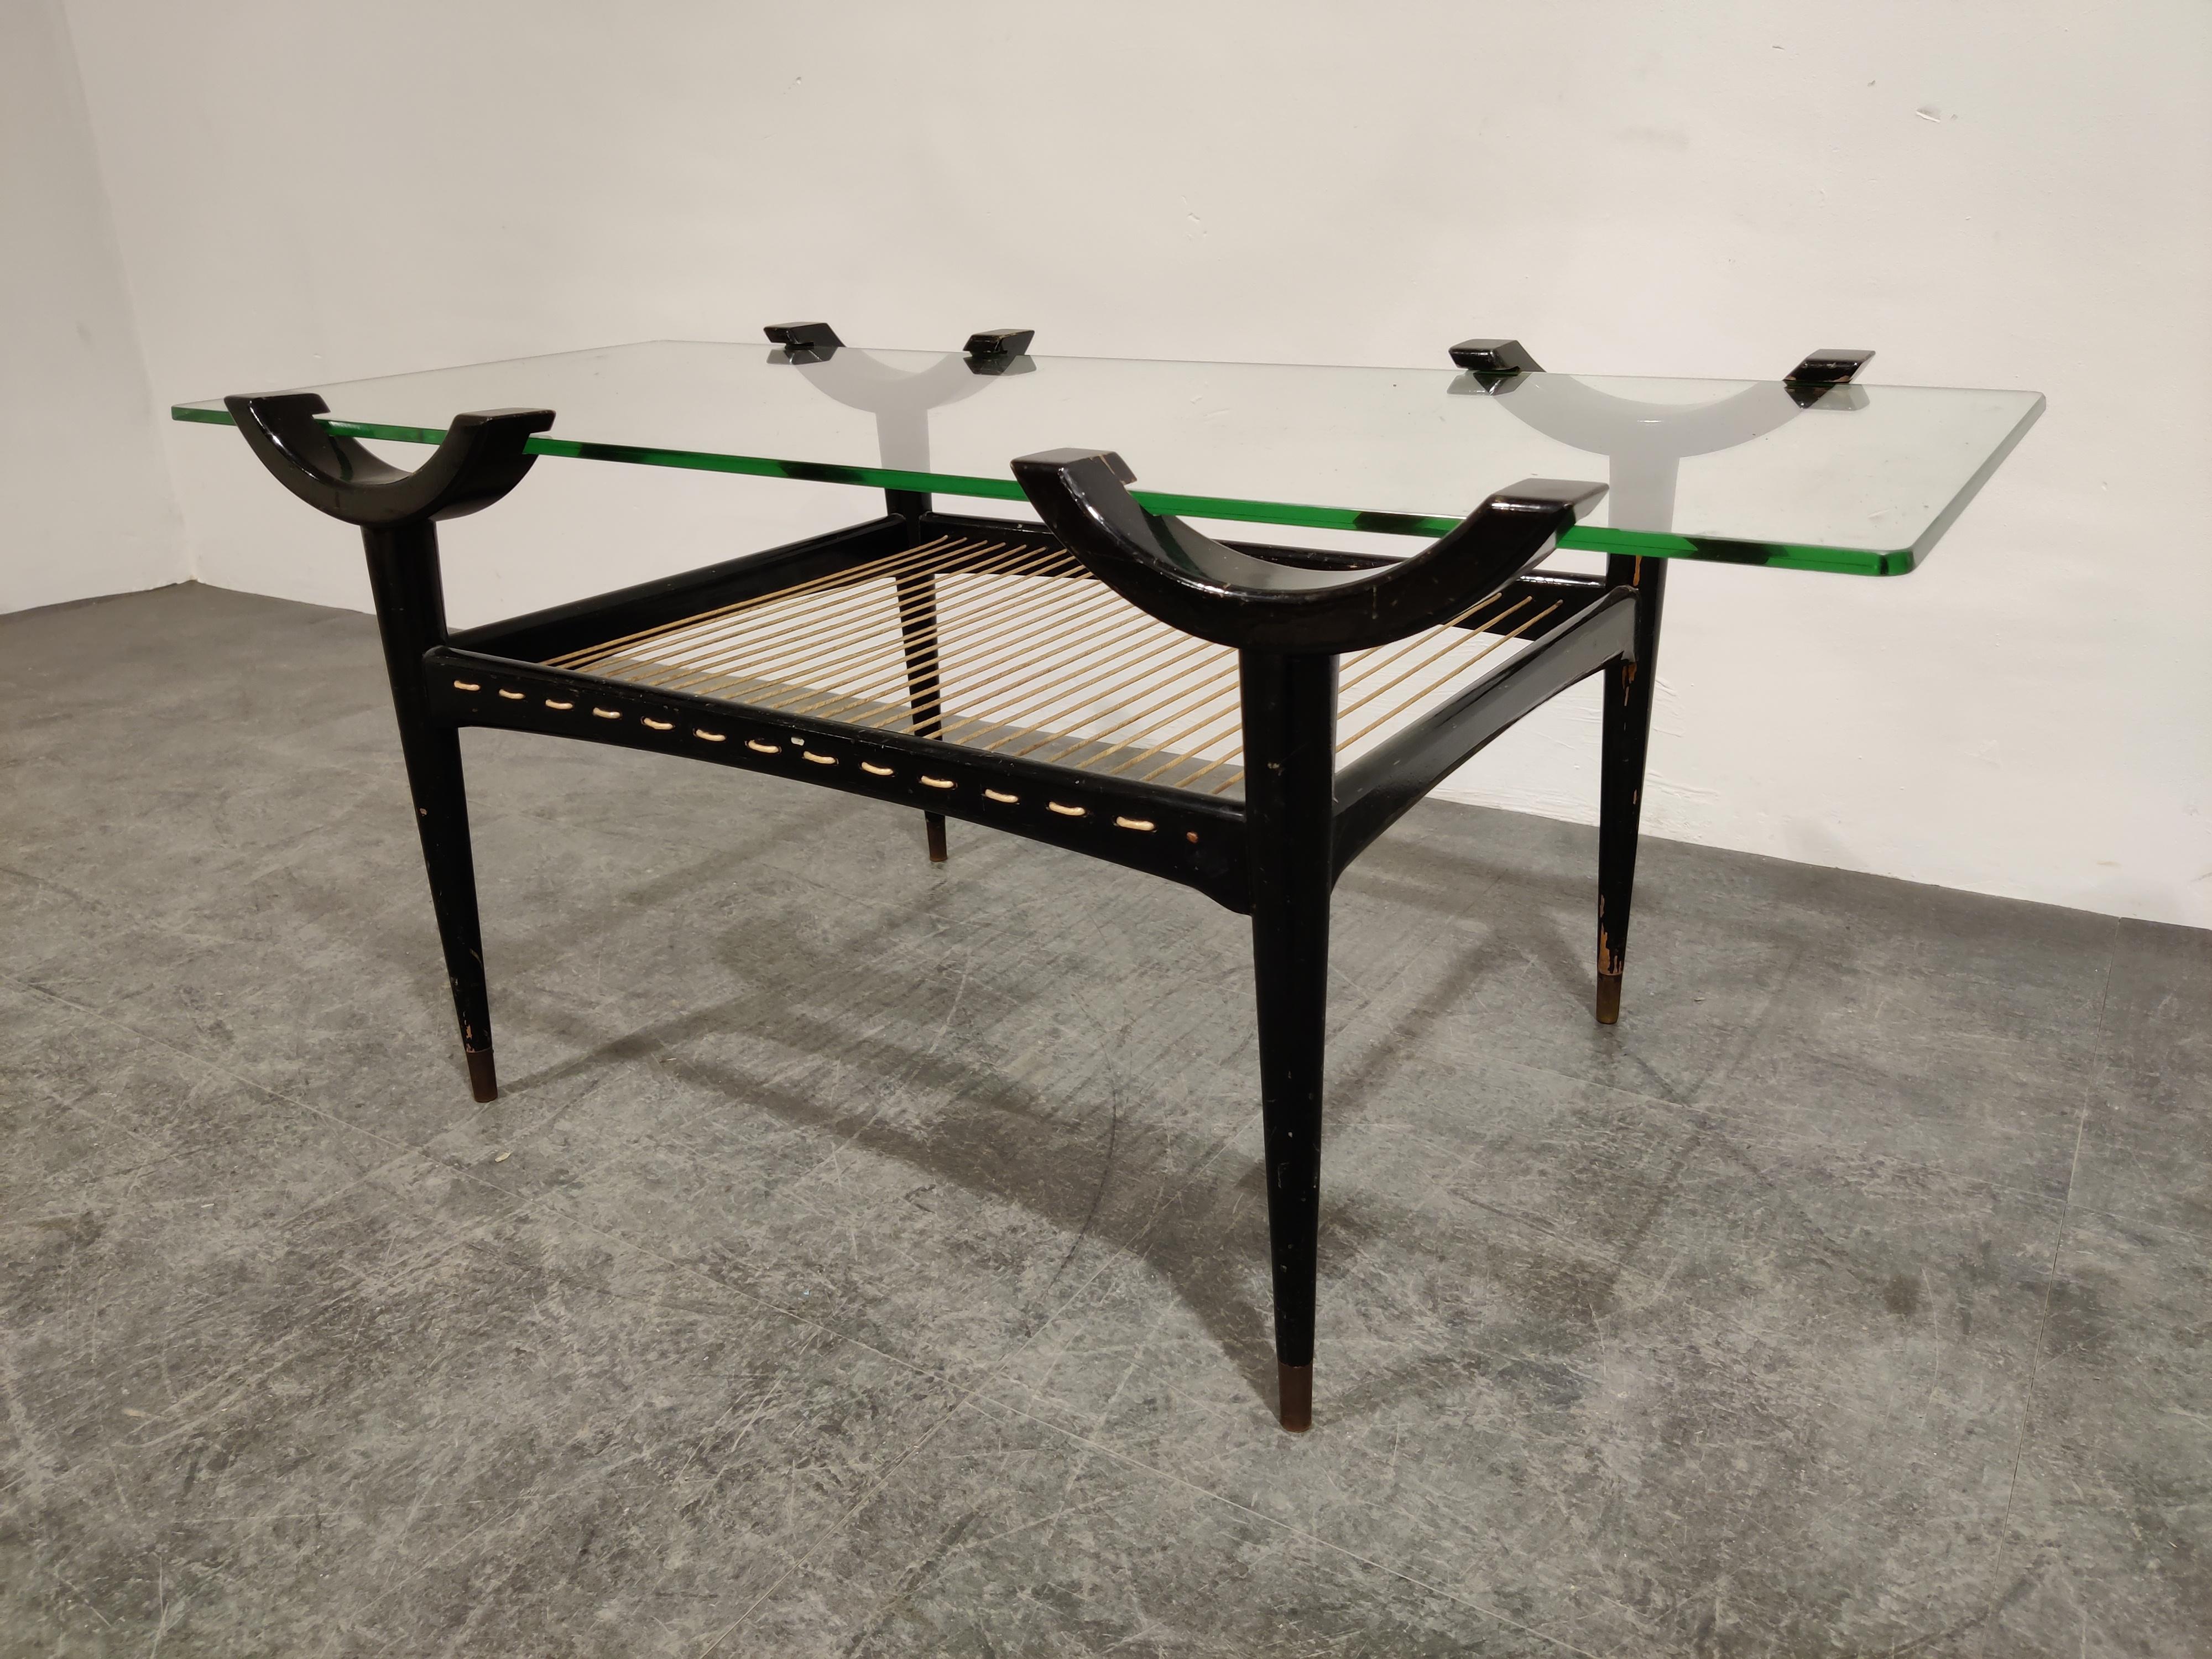 Rare midcentury lacquered wooden floating top coffee table.

The glass top slides into the supporting arms creating a unique way of suporting the glass and making it a smart looking table.

The coffee table has also a magazine storage space made